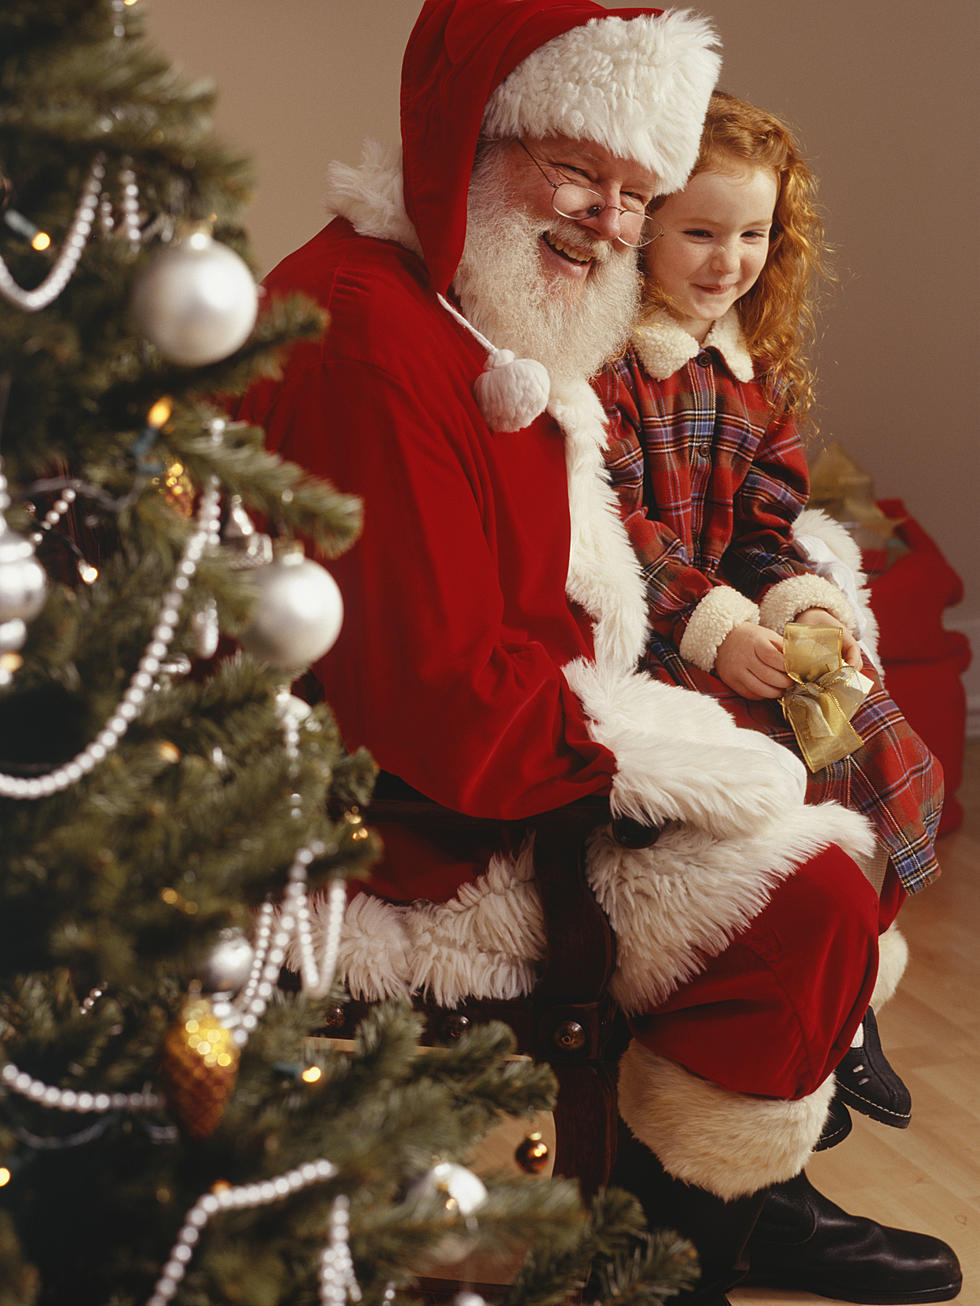 Take Your Kids to See Santa in Dover, New Hampshire, for Some Holiday Cheer